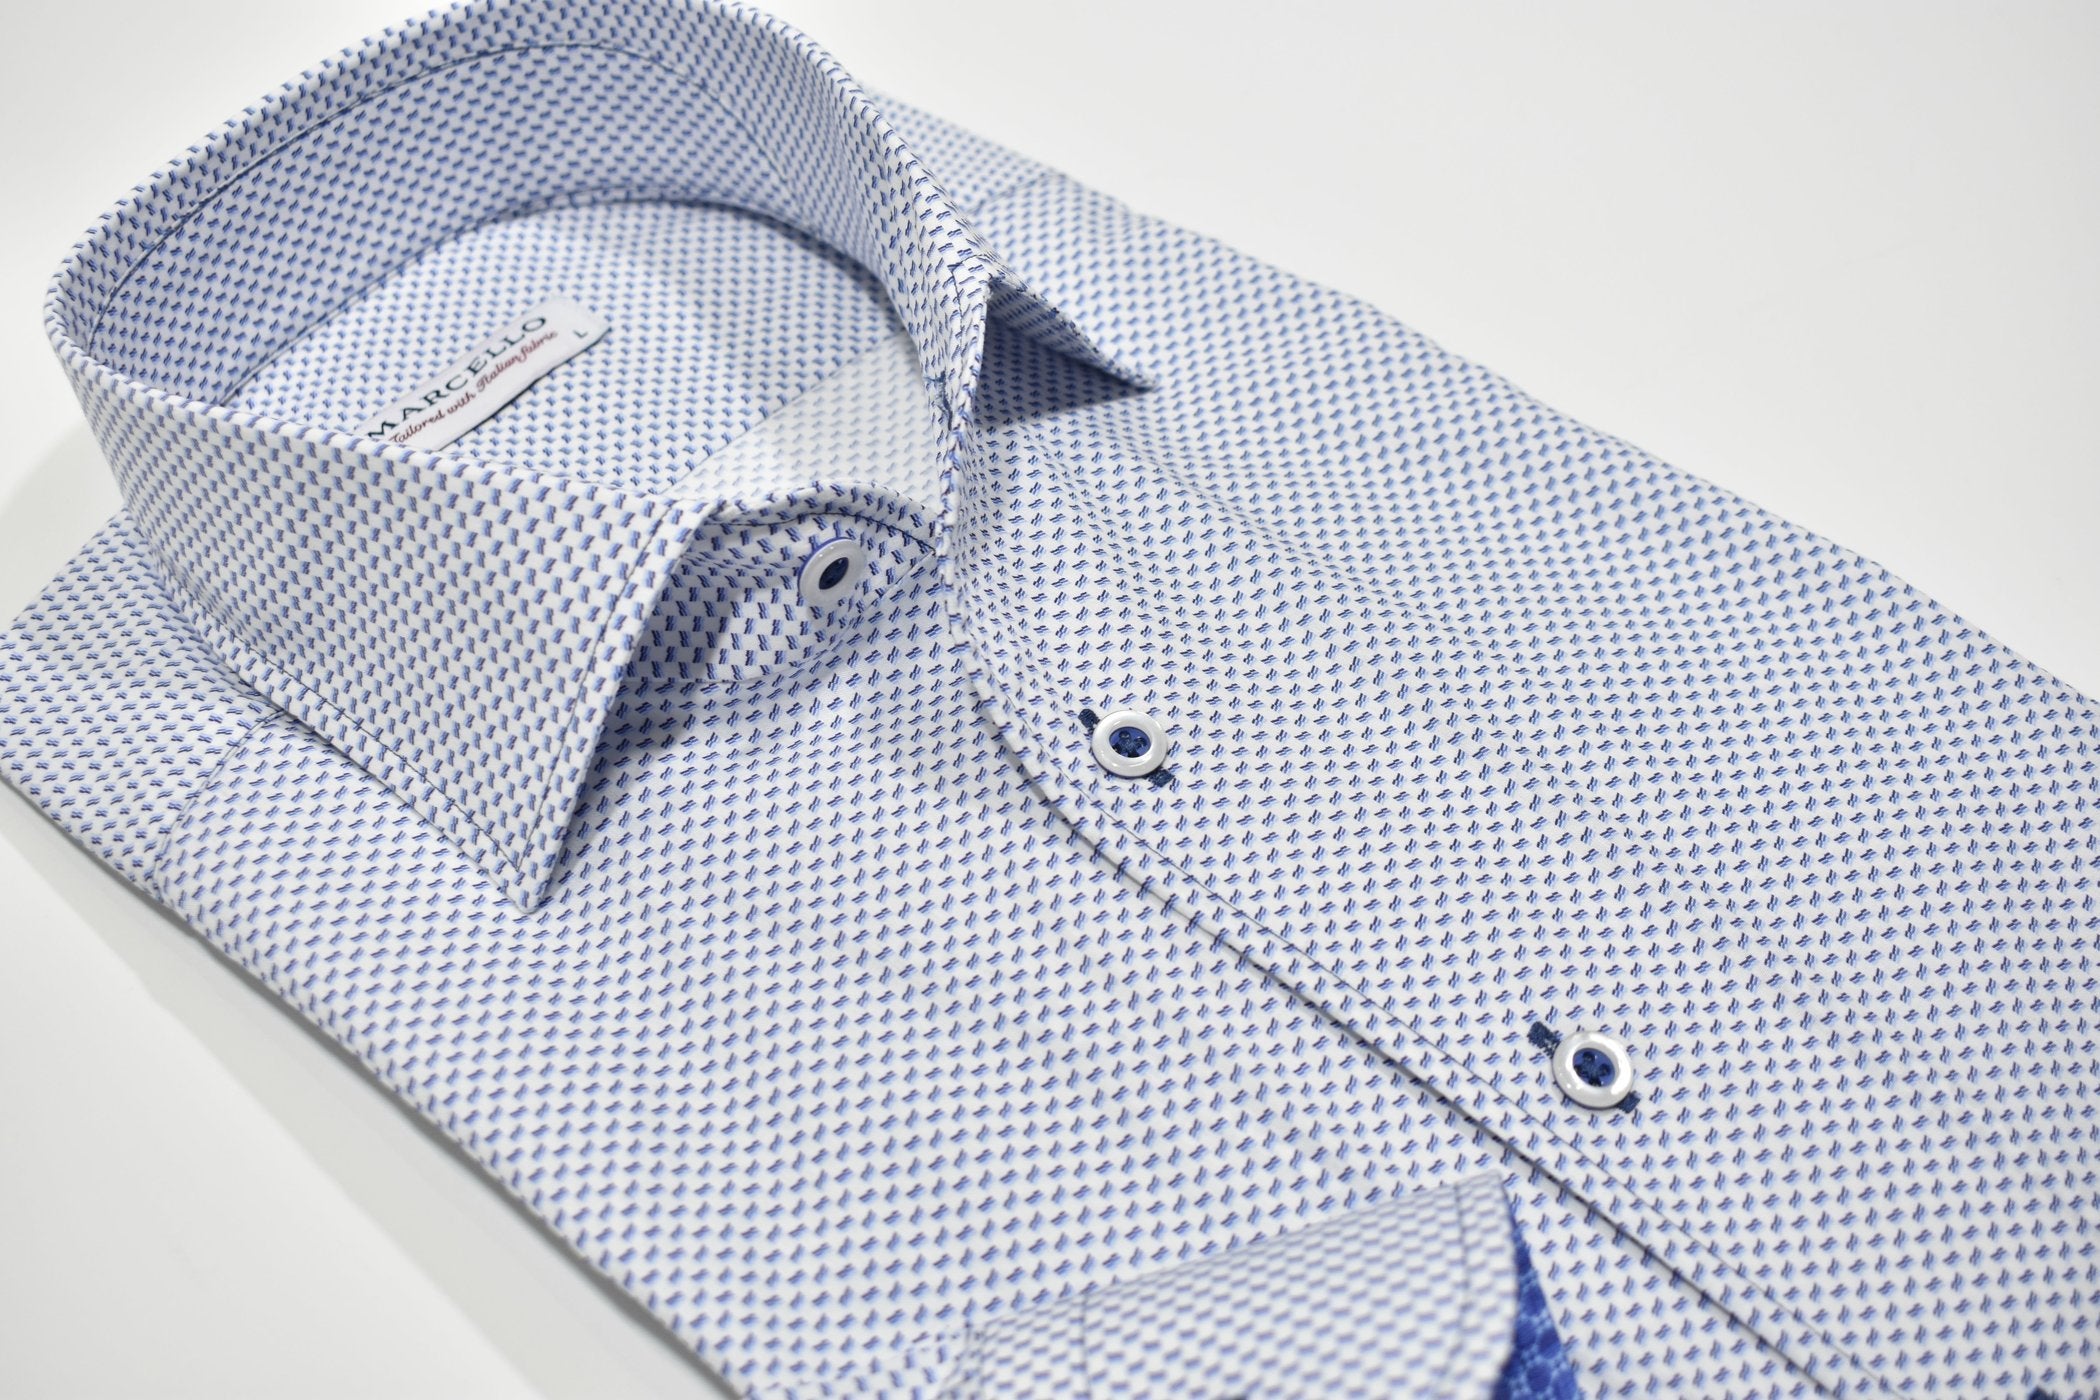 Rich. Elegant. A Must Have. Featuring a Marcello exclusive one piece roll collar, this medium blue and navy neat patterned shirt is classic in nature, but exudes a fashion sense. Fantastic worn alone with pant or jeans or excellent under a sport coat.